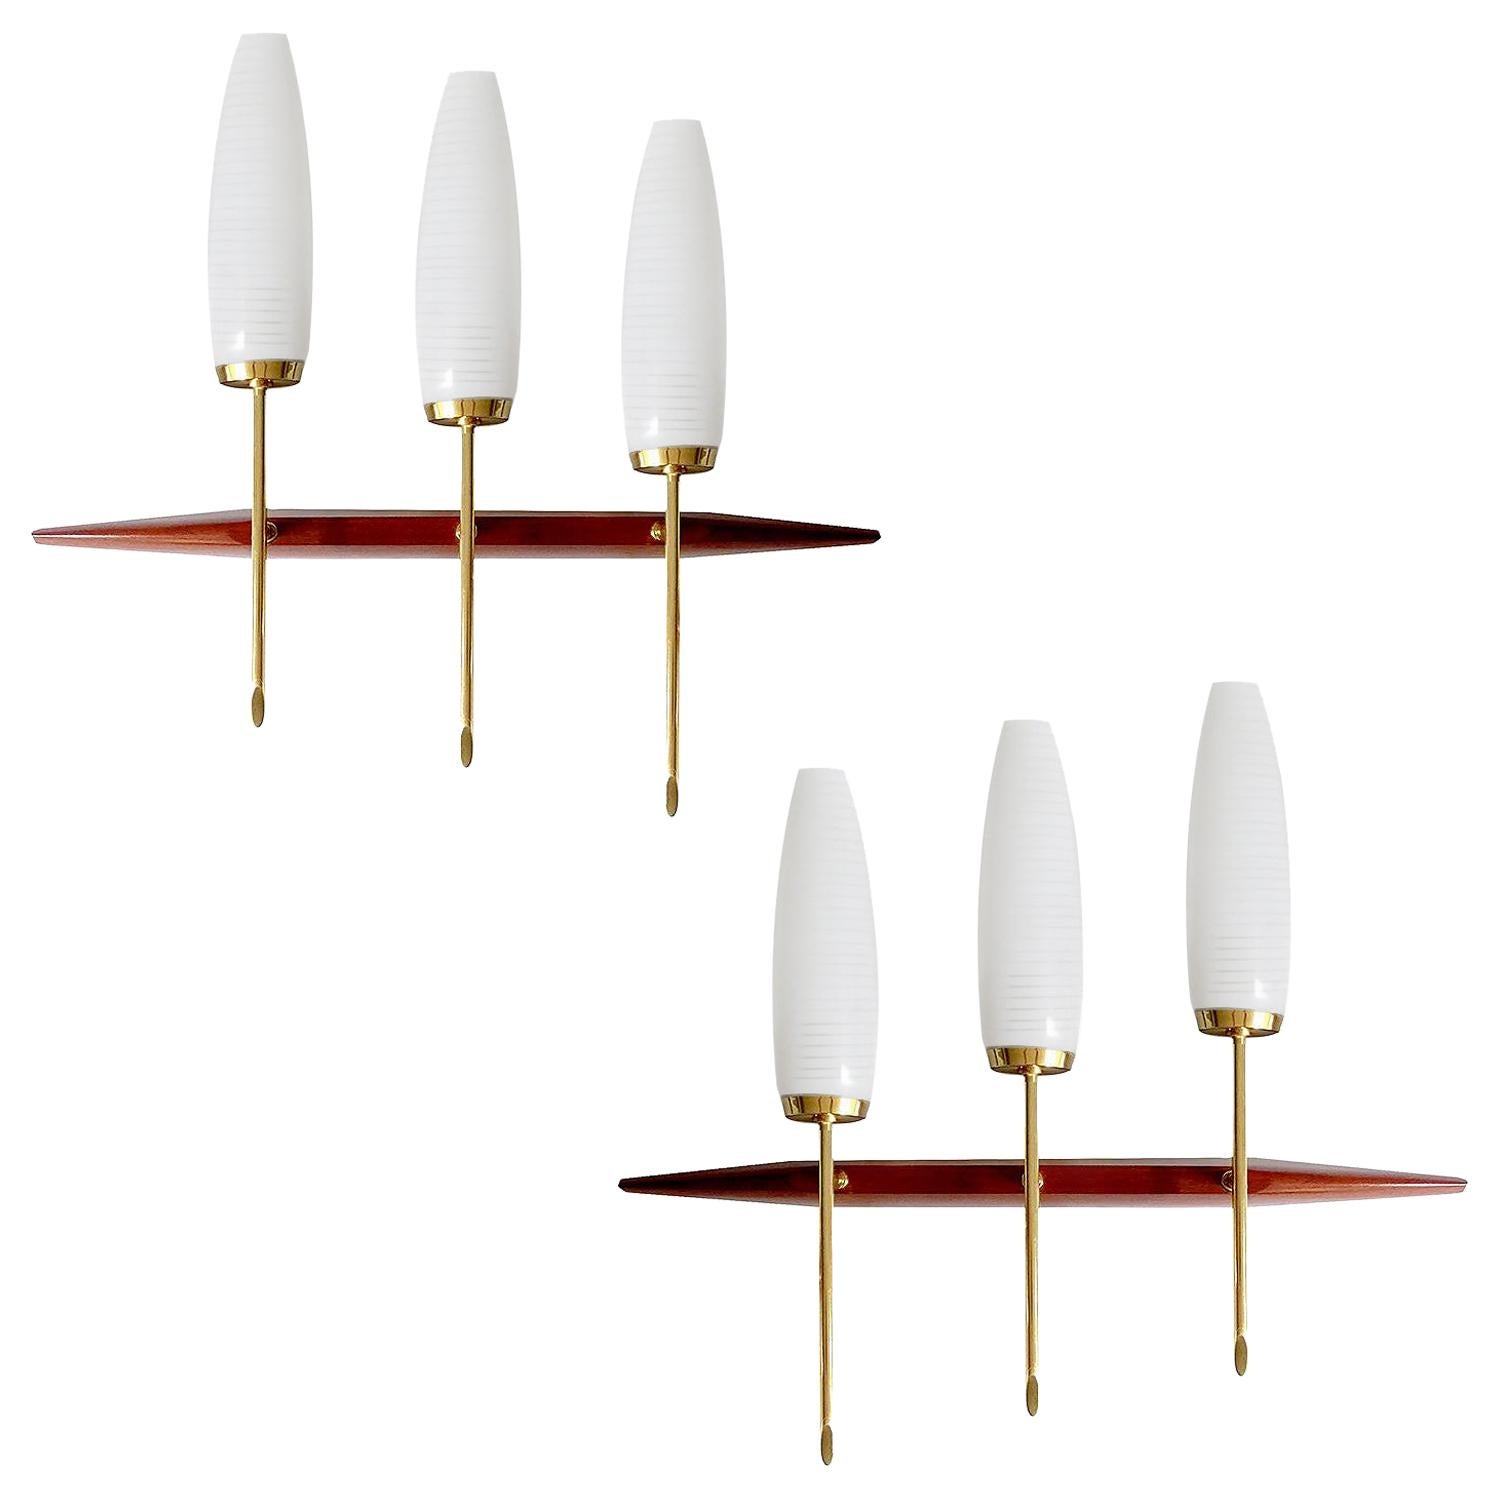  Pair of  French Mid Century Sconces, Maison Arlus, 1960s Danish Modern Style For Sale